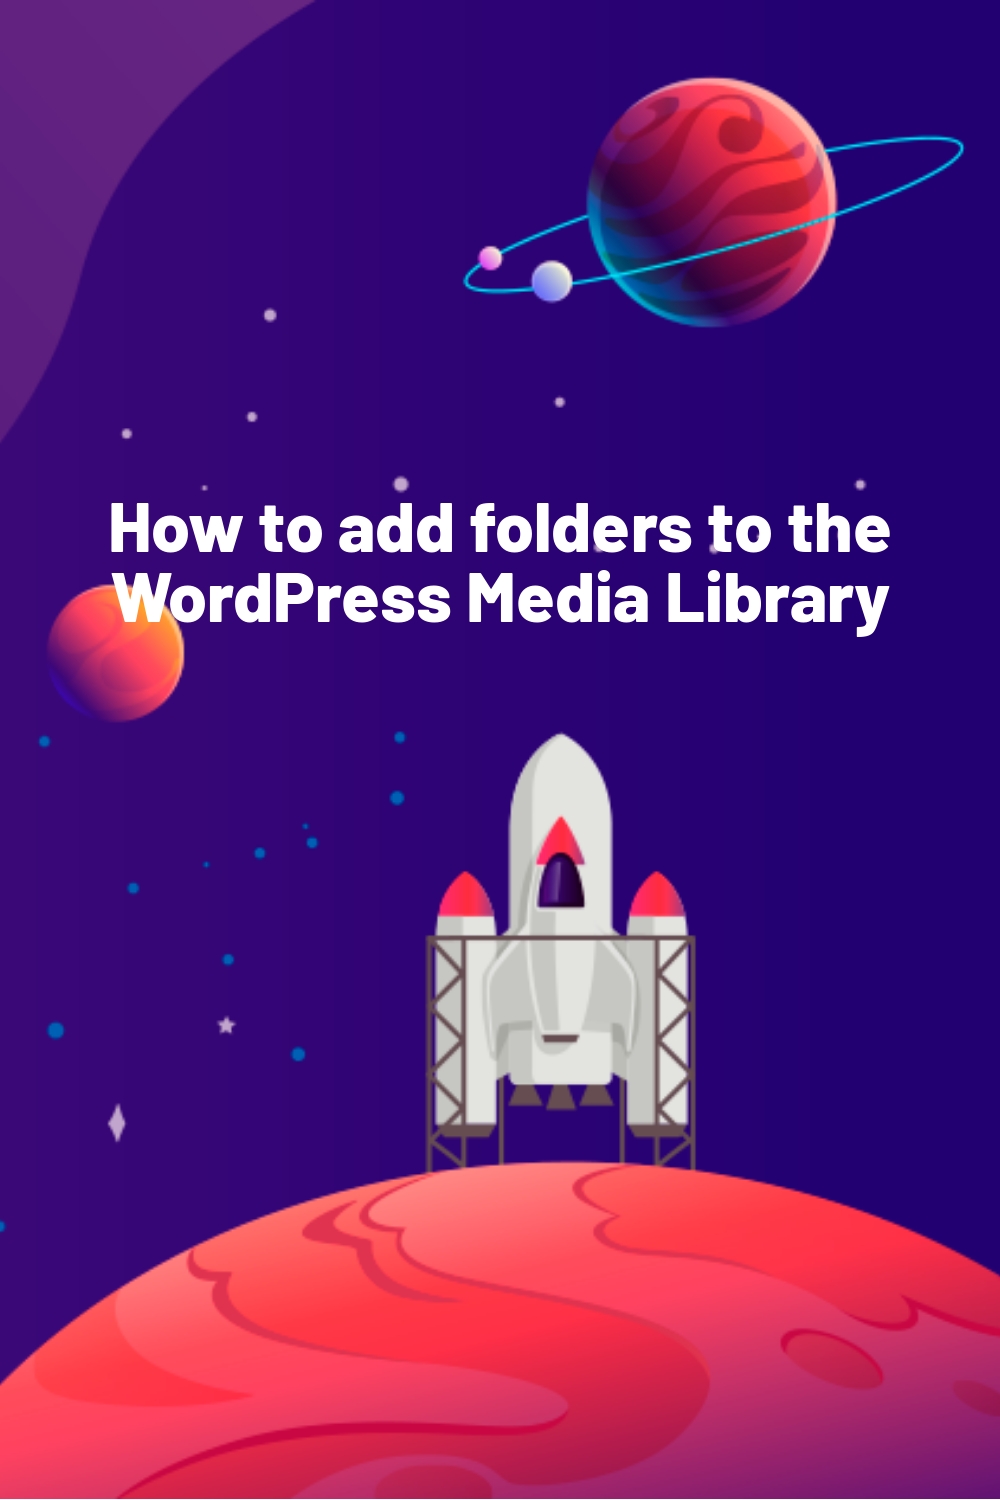 How to add folders to the WordPress Media Library